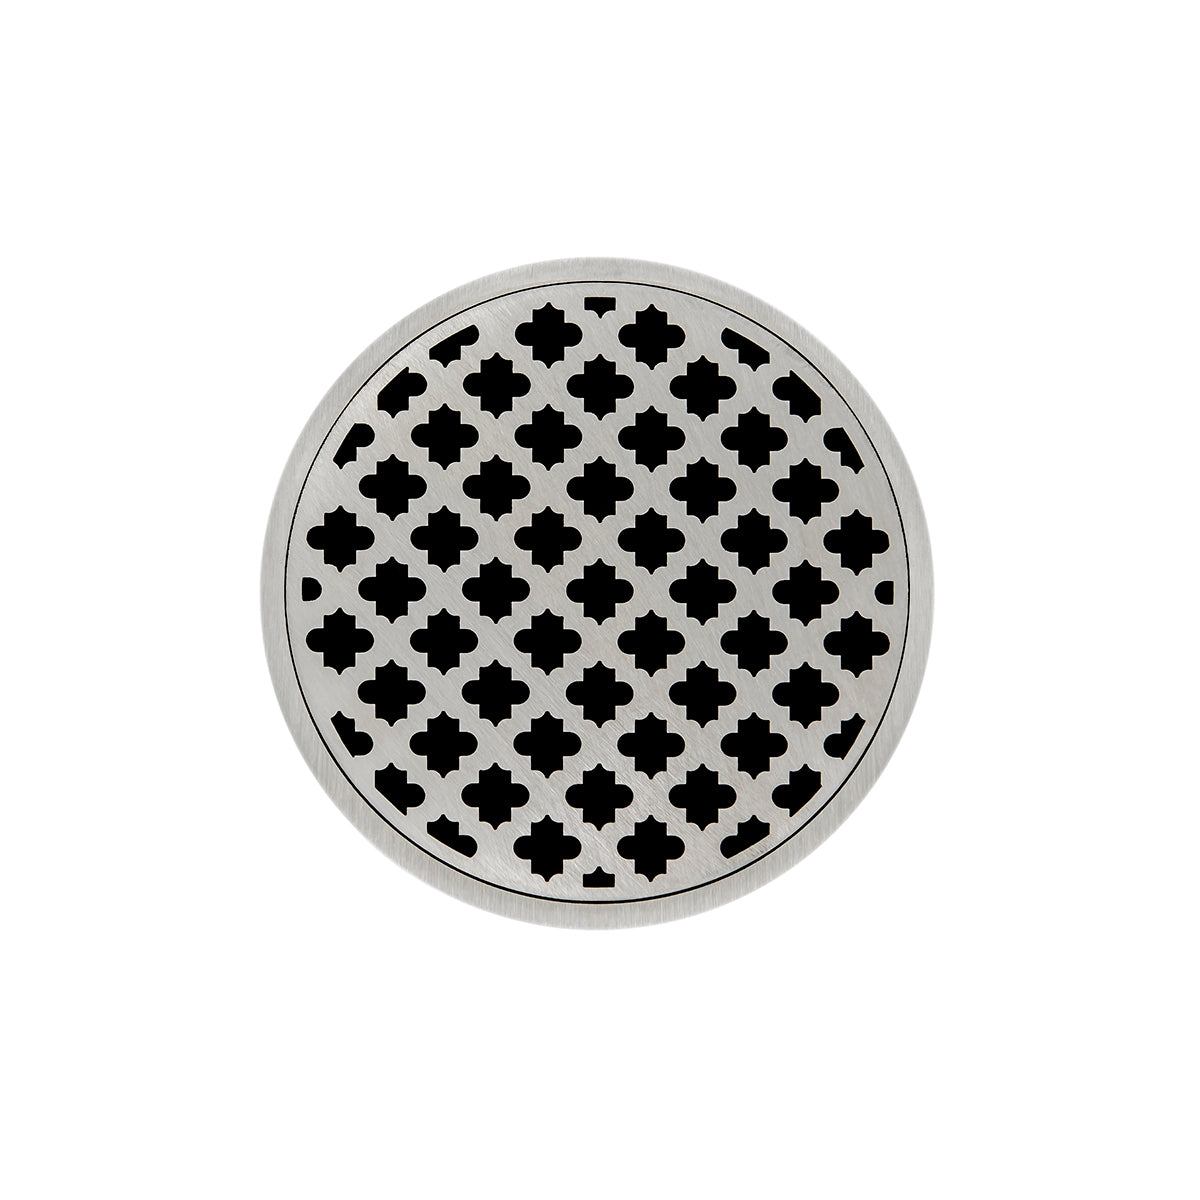 Infinity Drain 5" Round Strainer Premium Center Drain Kit with Moor Pattern Decorative Plate and 2" Throat for RMD 5